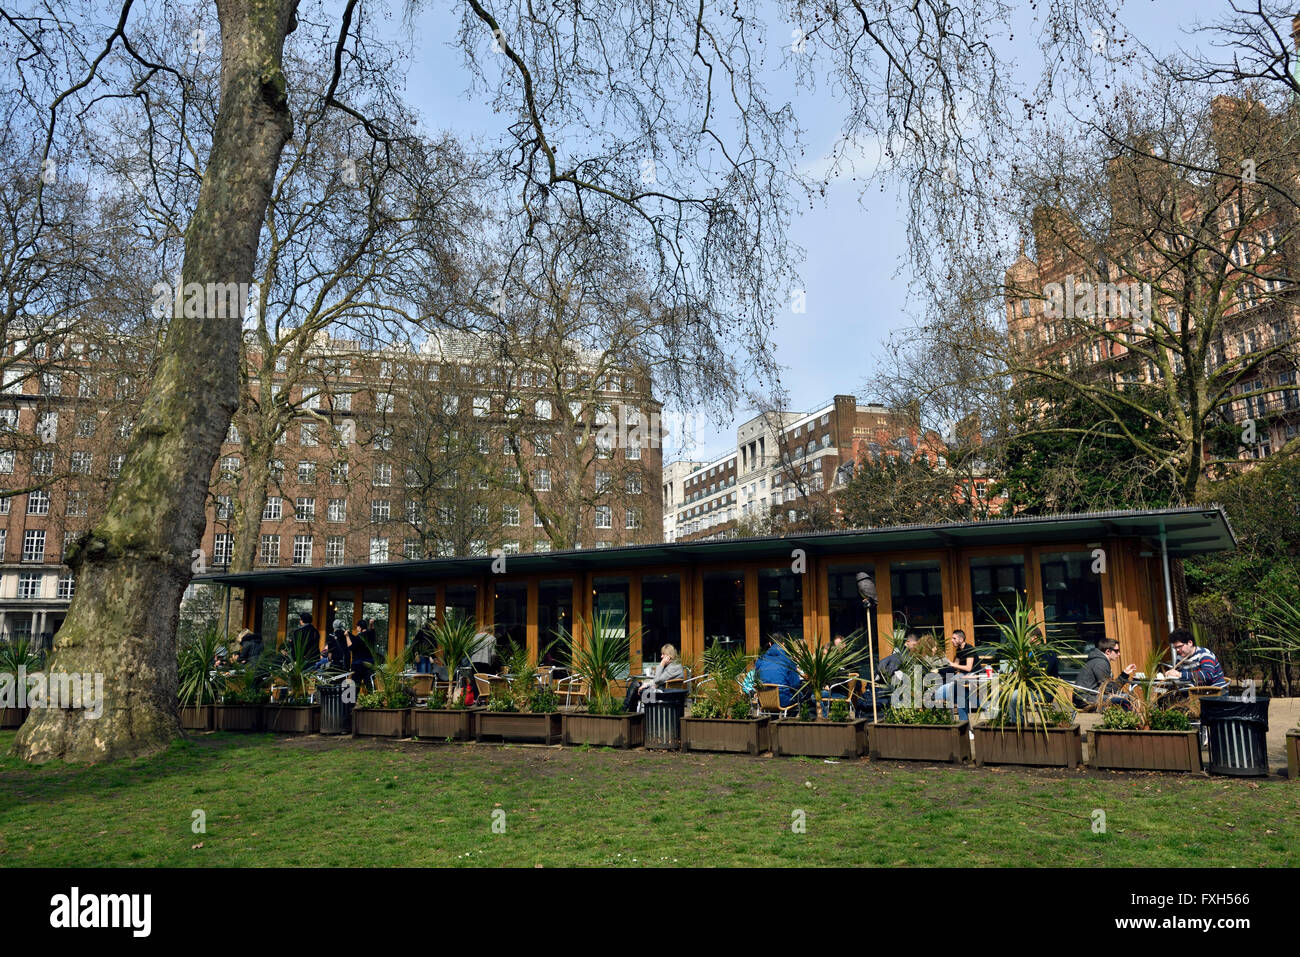 The Cafe in the Garden with people eating outside Russell Square London Borough of Camden England Britain UK Stock Photo